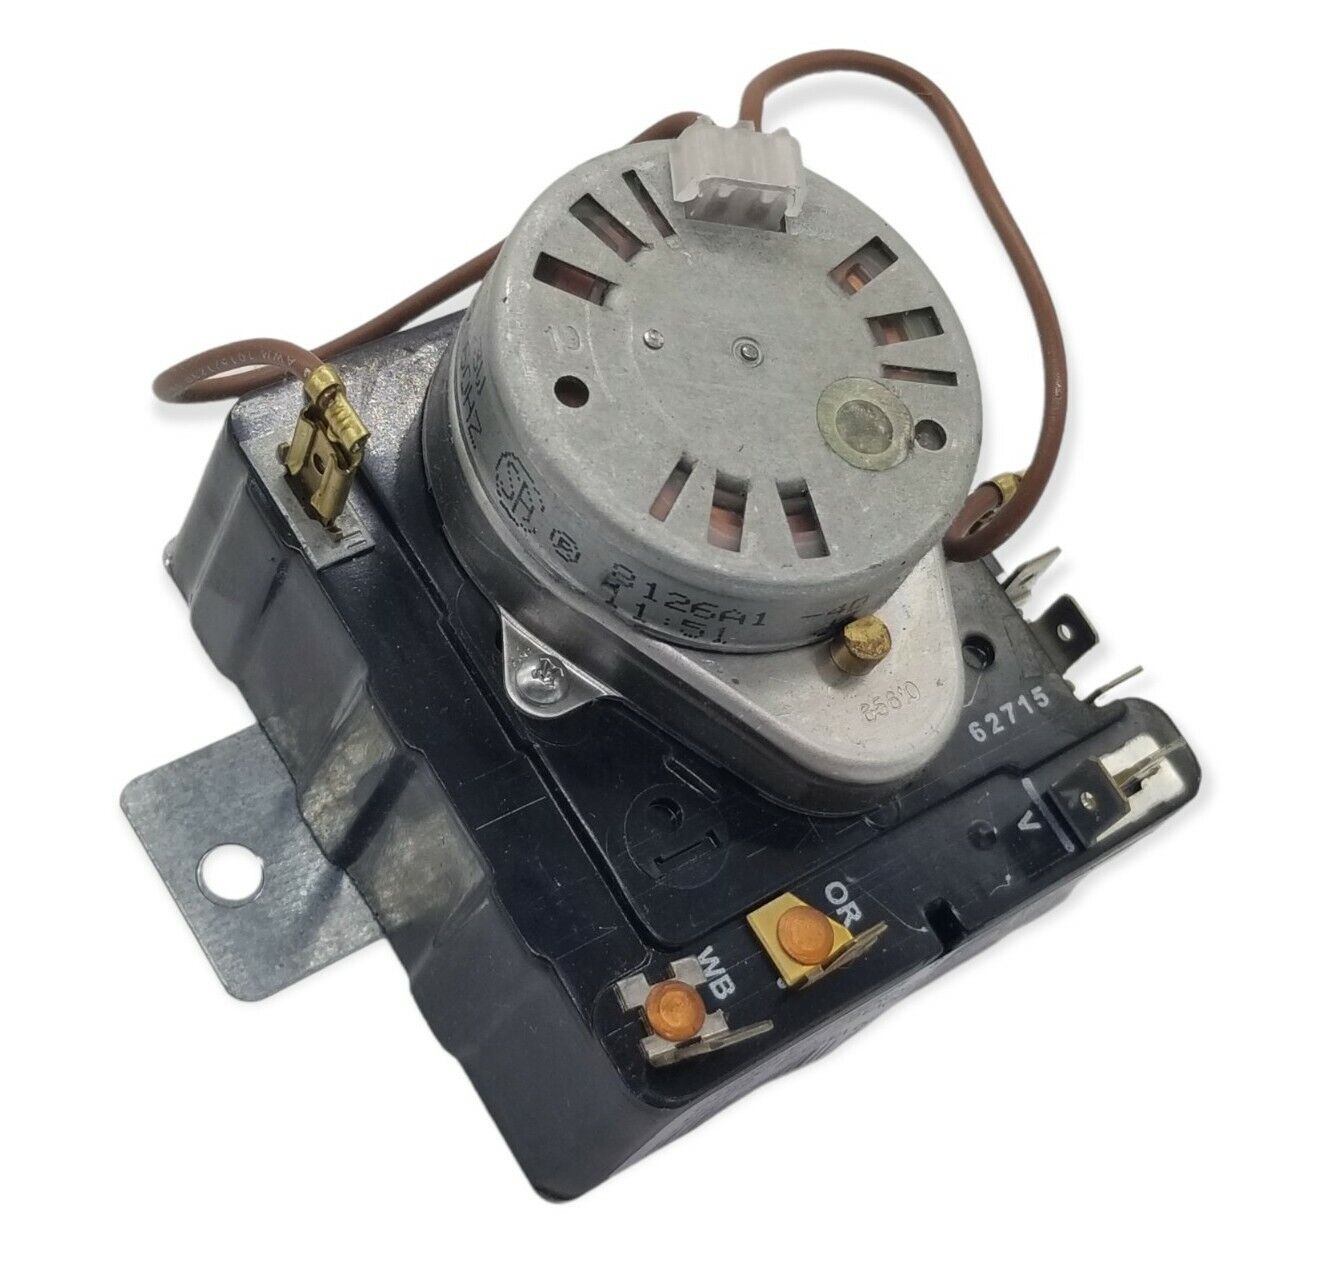 Genuine OEM Replacement for Whirlpool Dryer Timer 8299774A